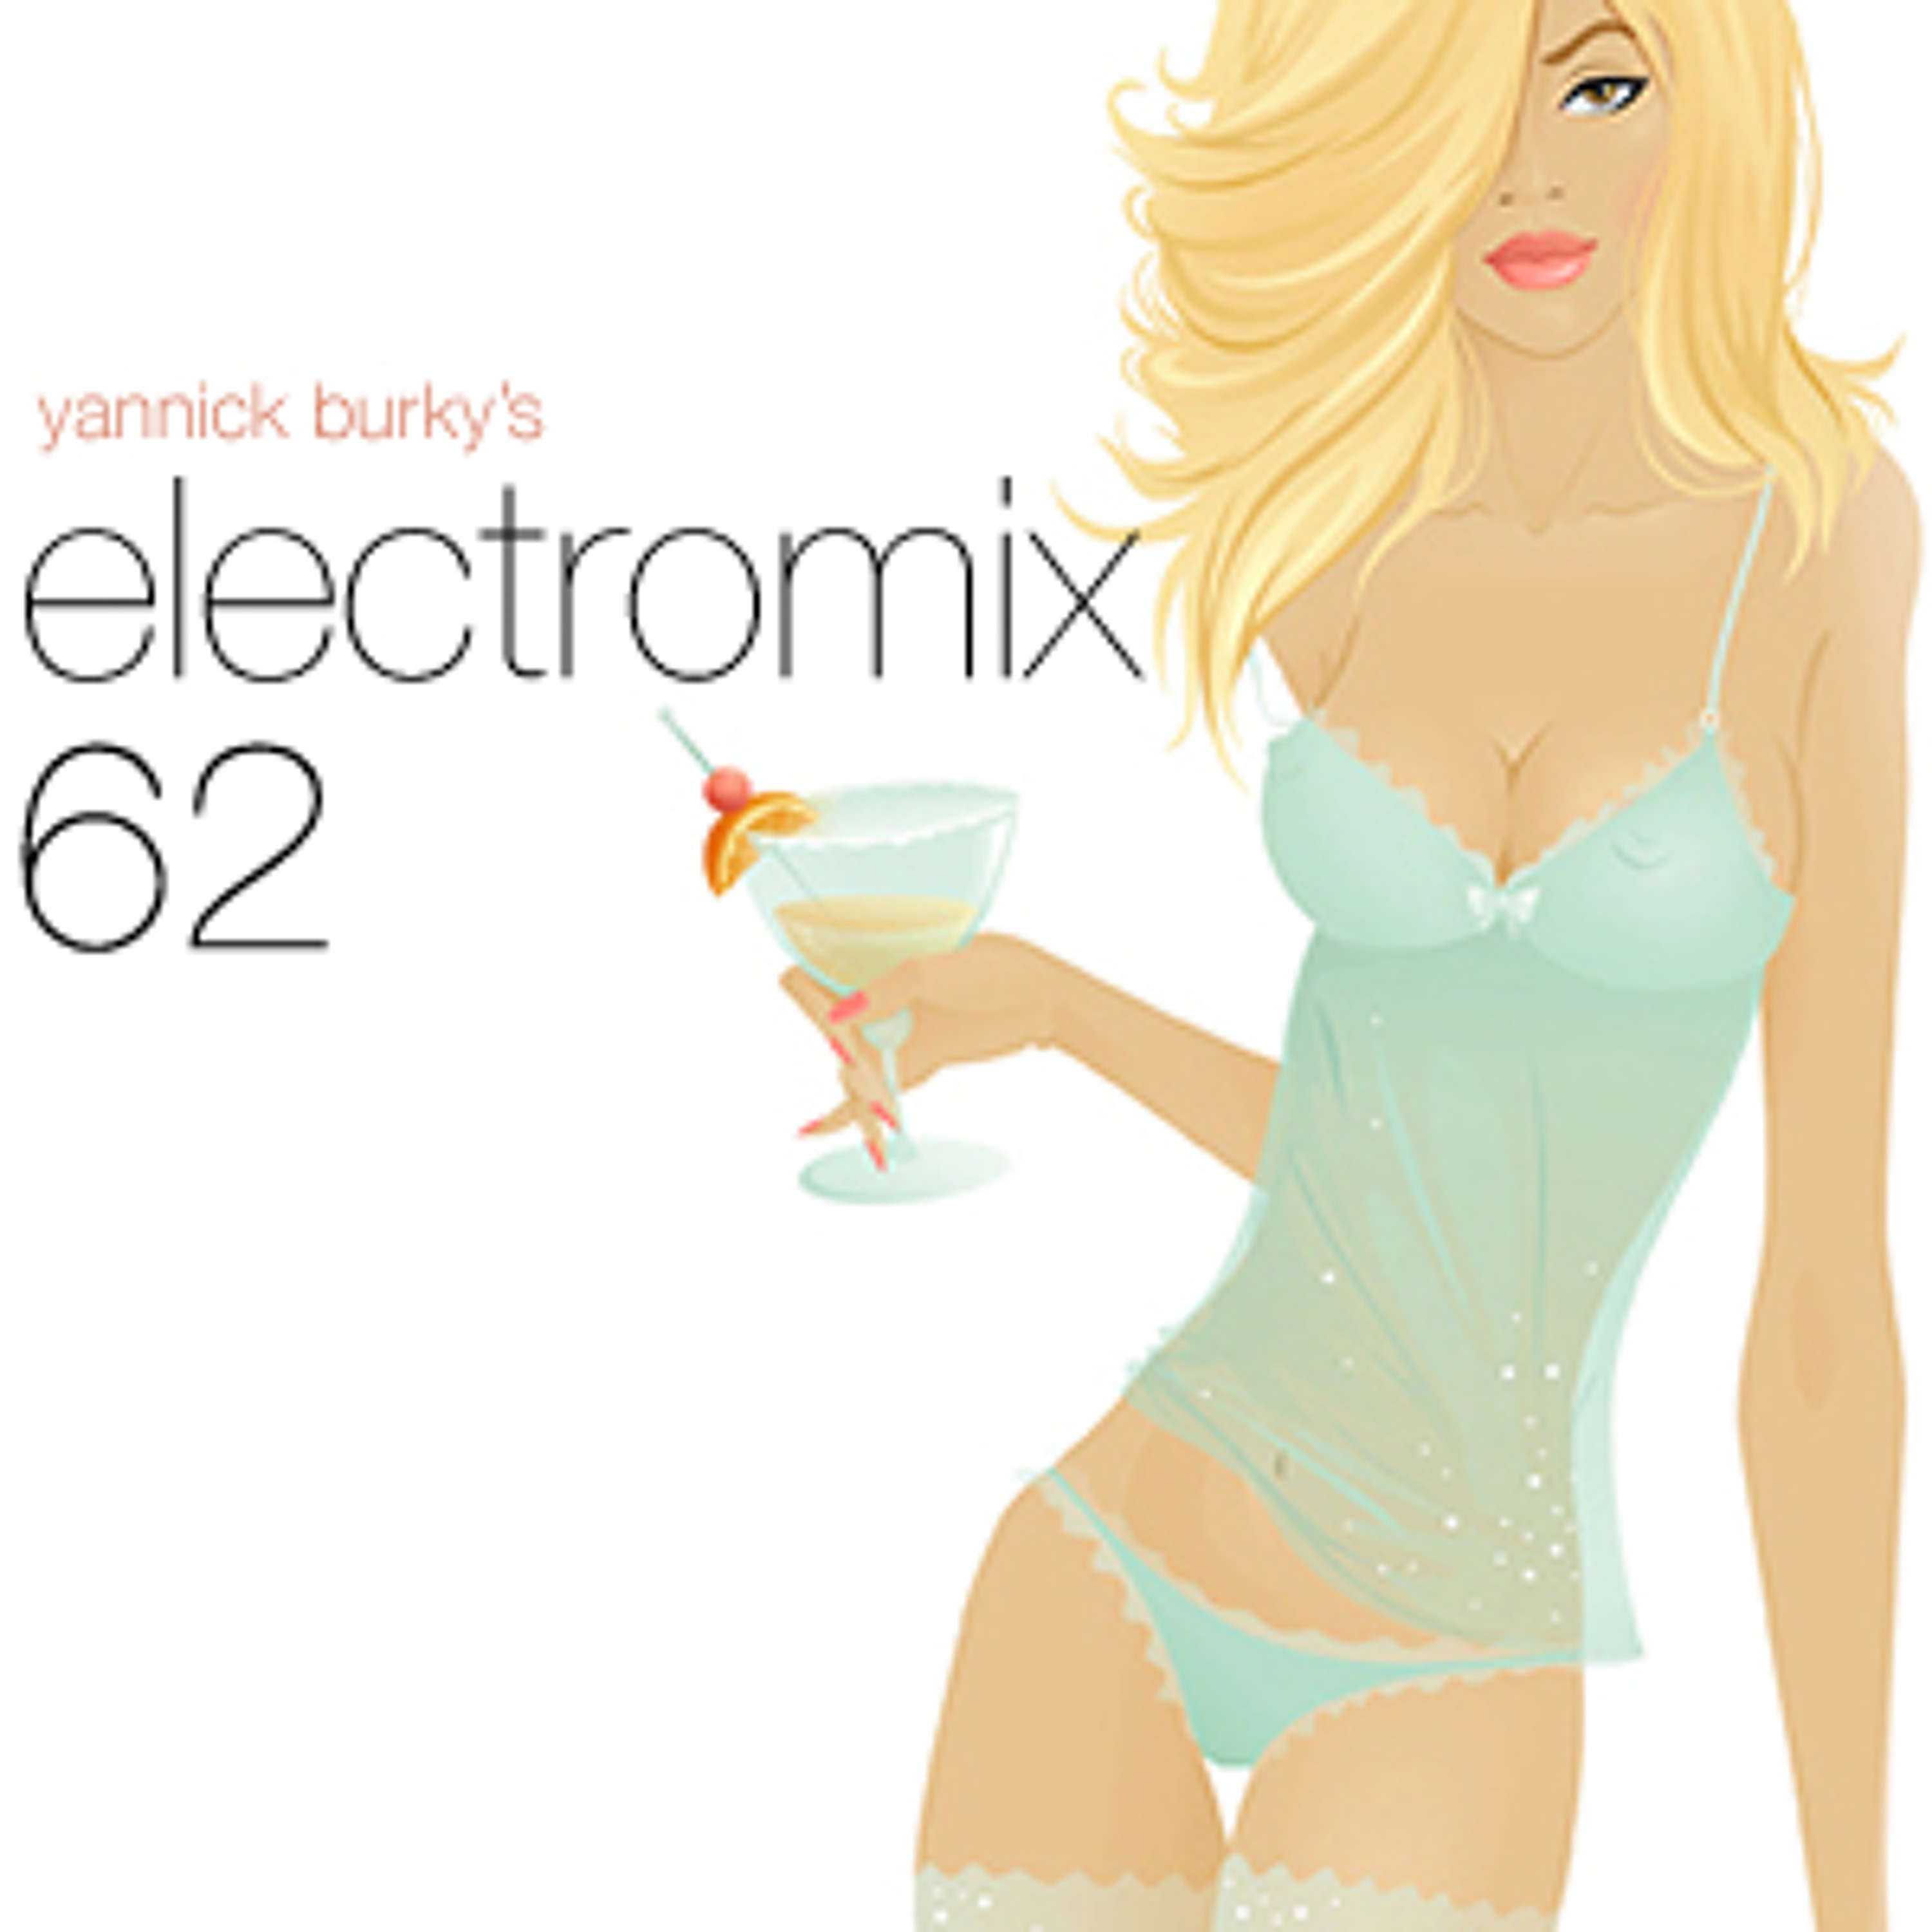 electromix 62 • House Music